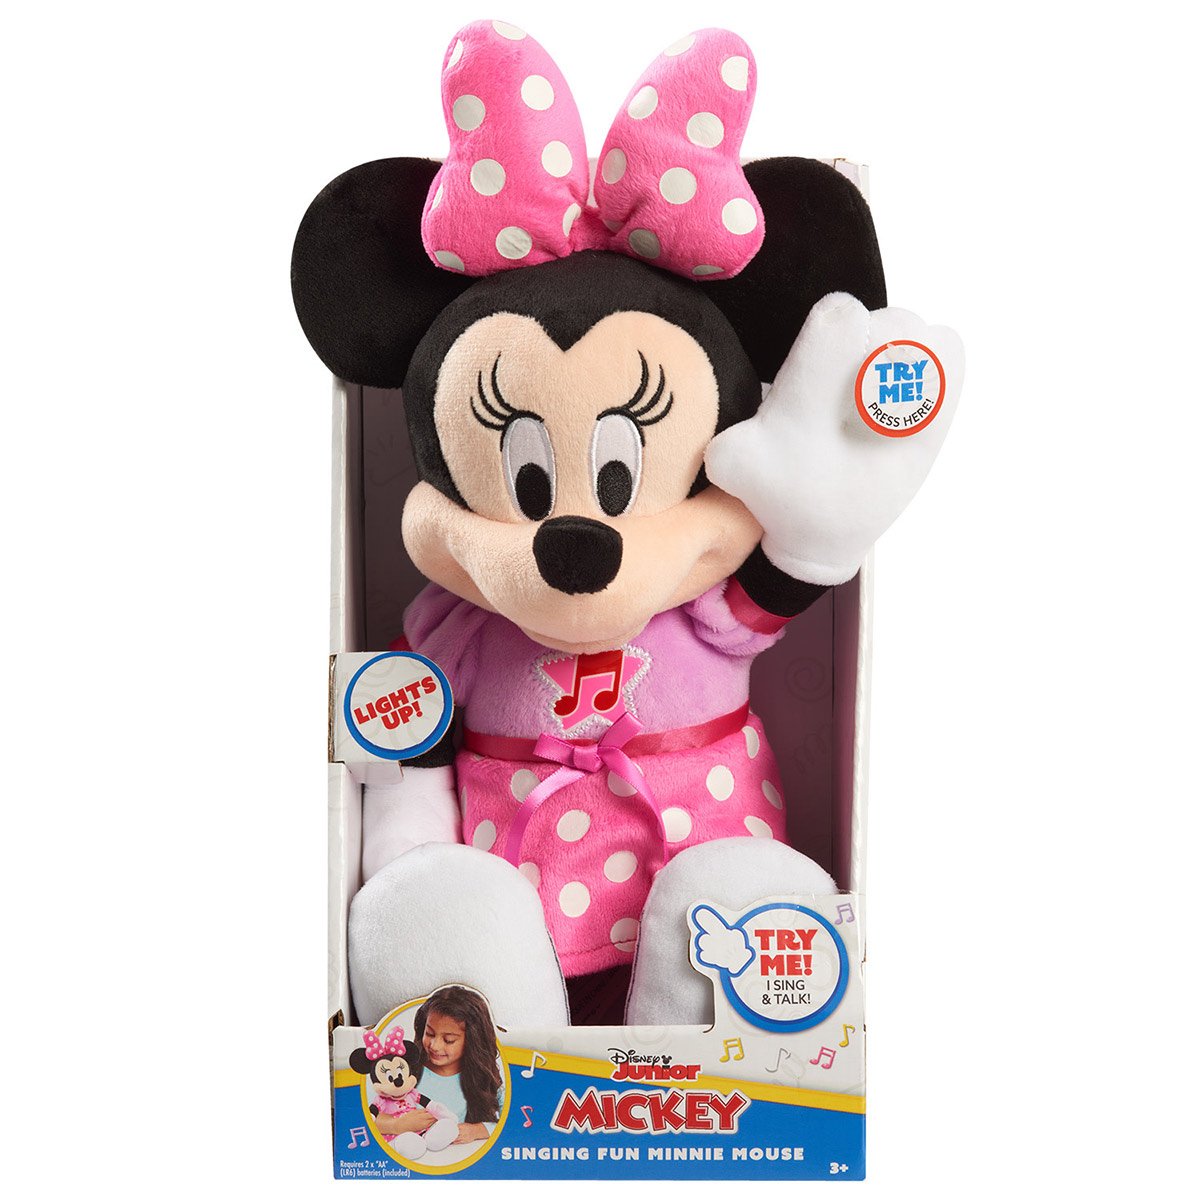 Peluche interactive Mickey émotions Imc : King Jouet, Peluches interactives  Imc - Peluches